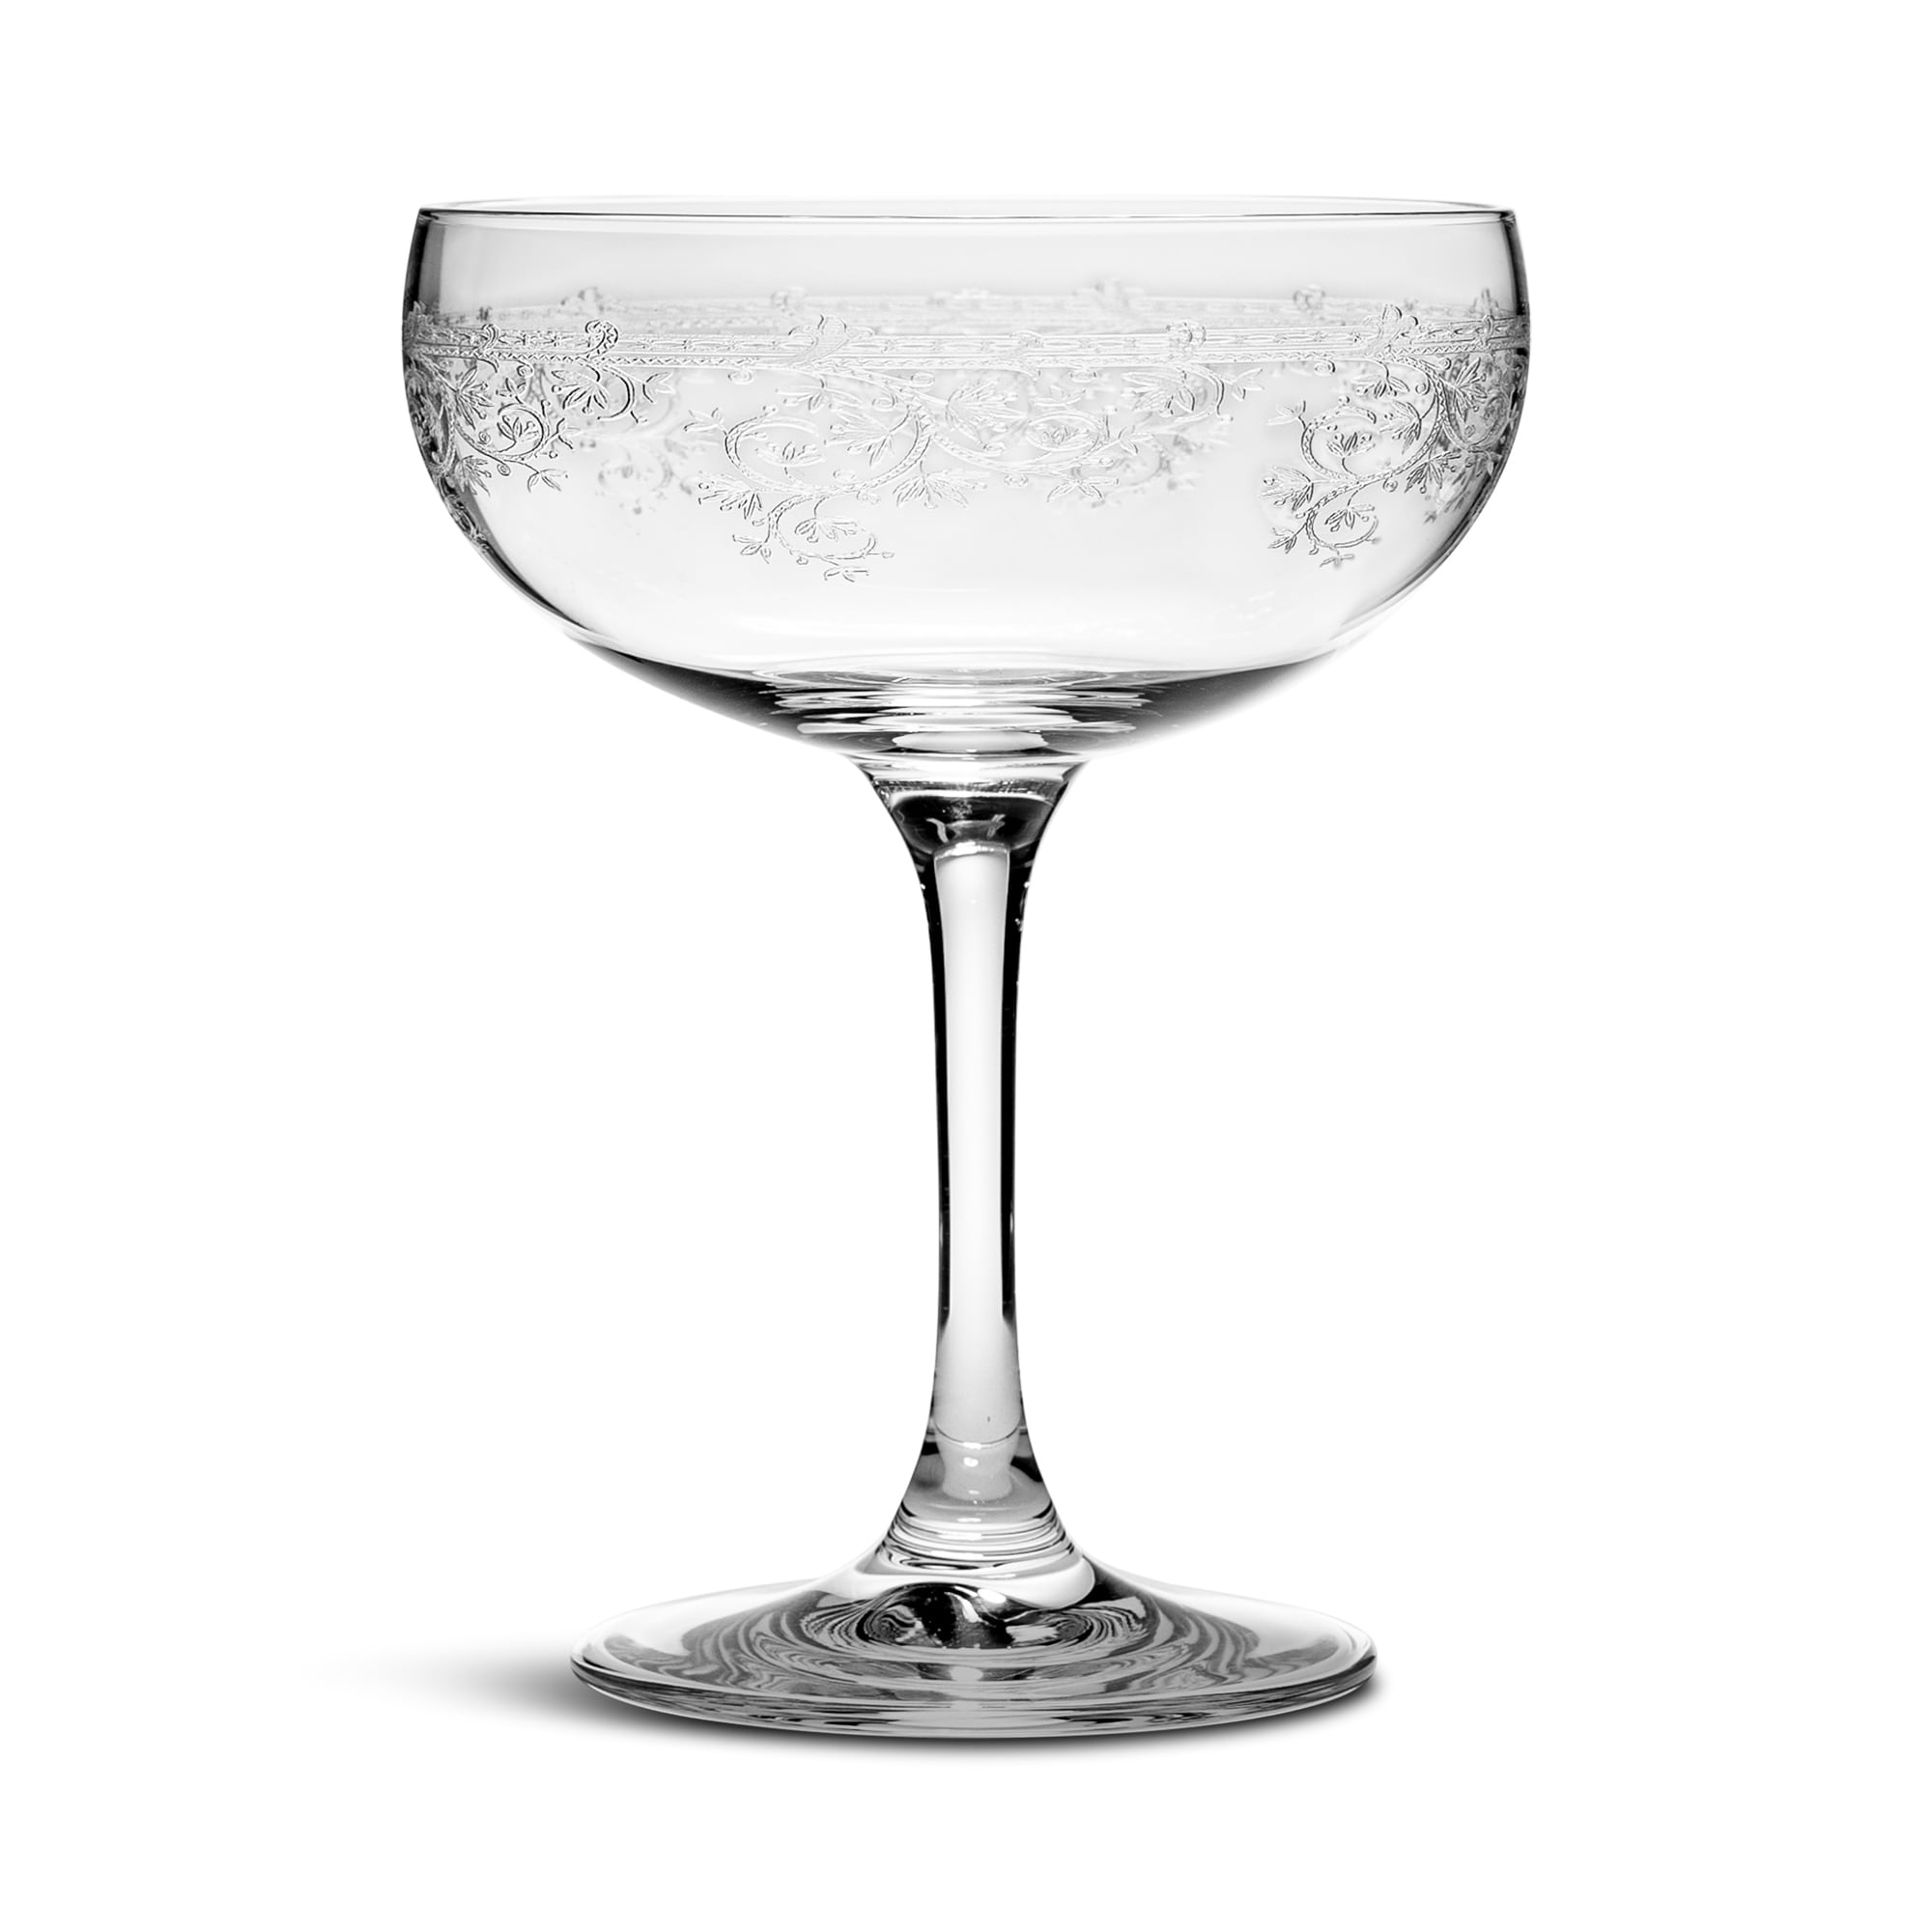 Tipsy Turvy Champagne Coupe -  Set of 12